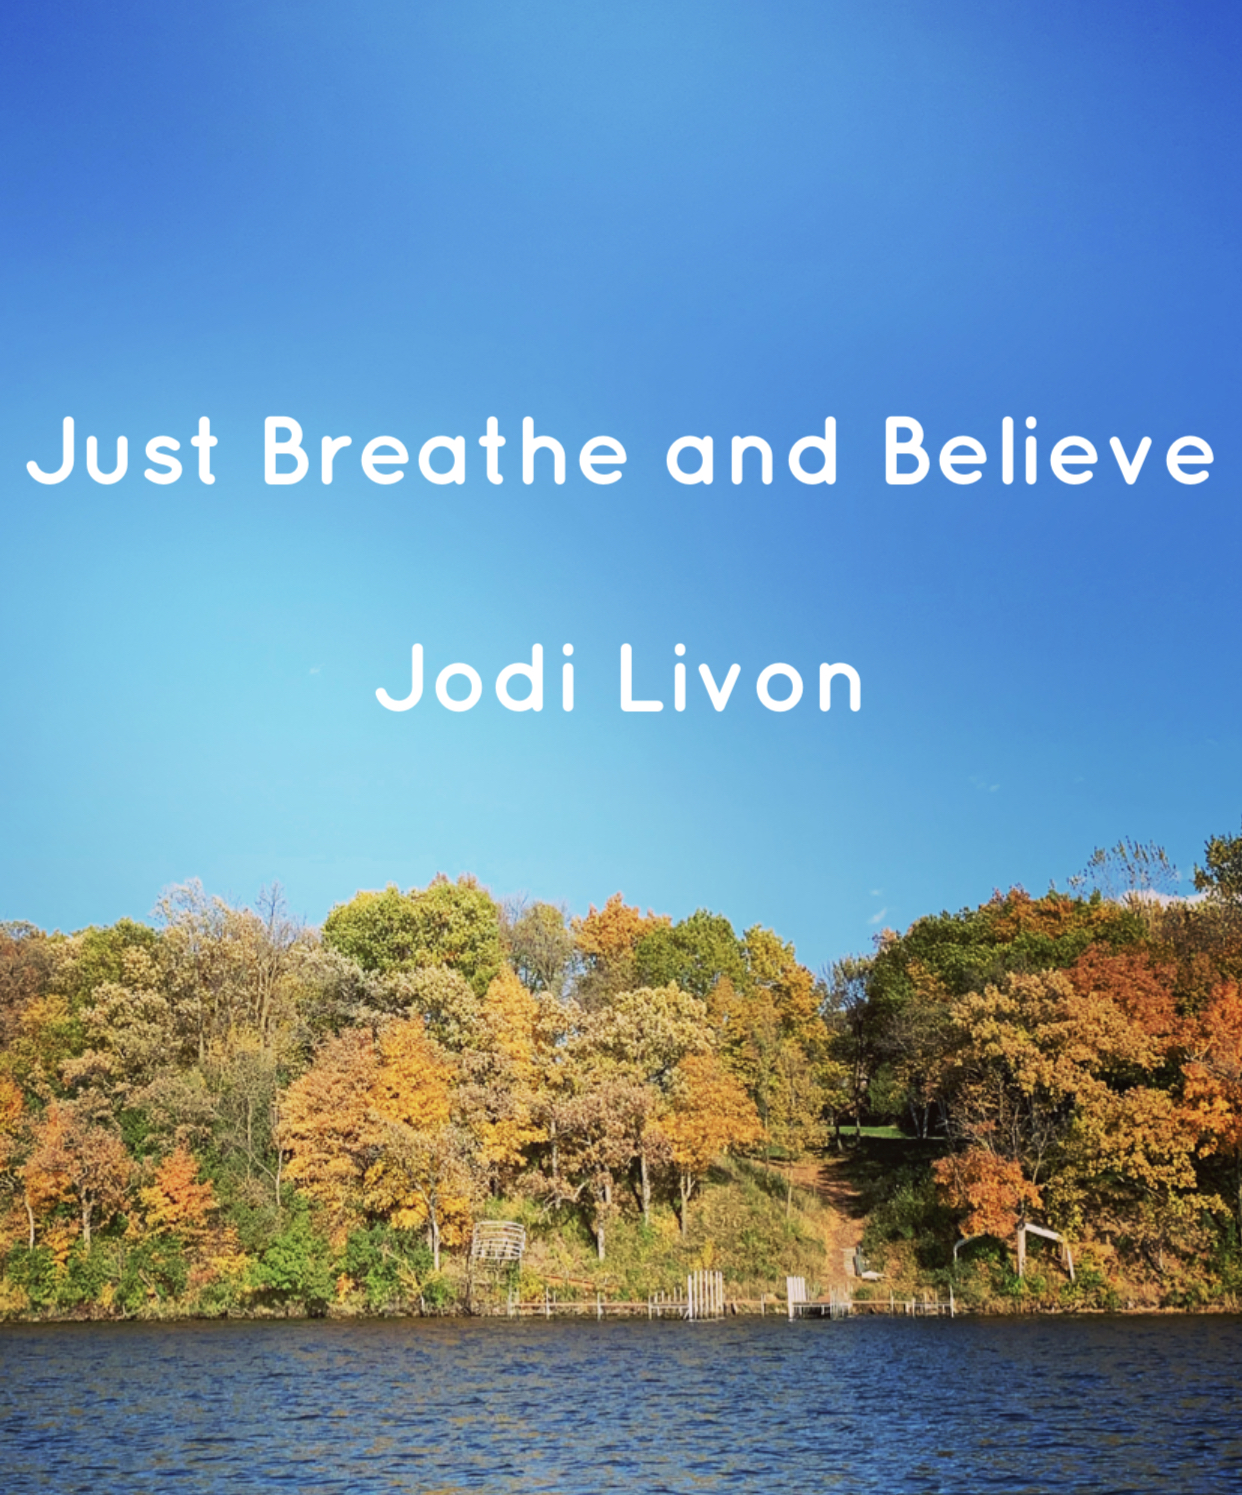 Just Breathe and Believe